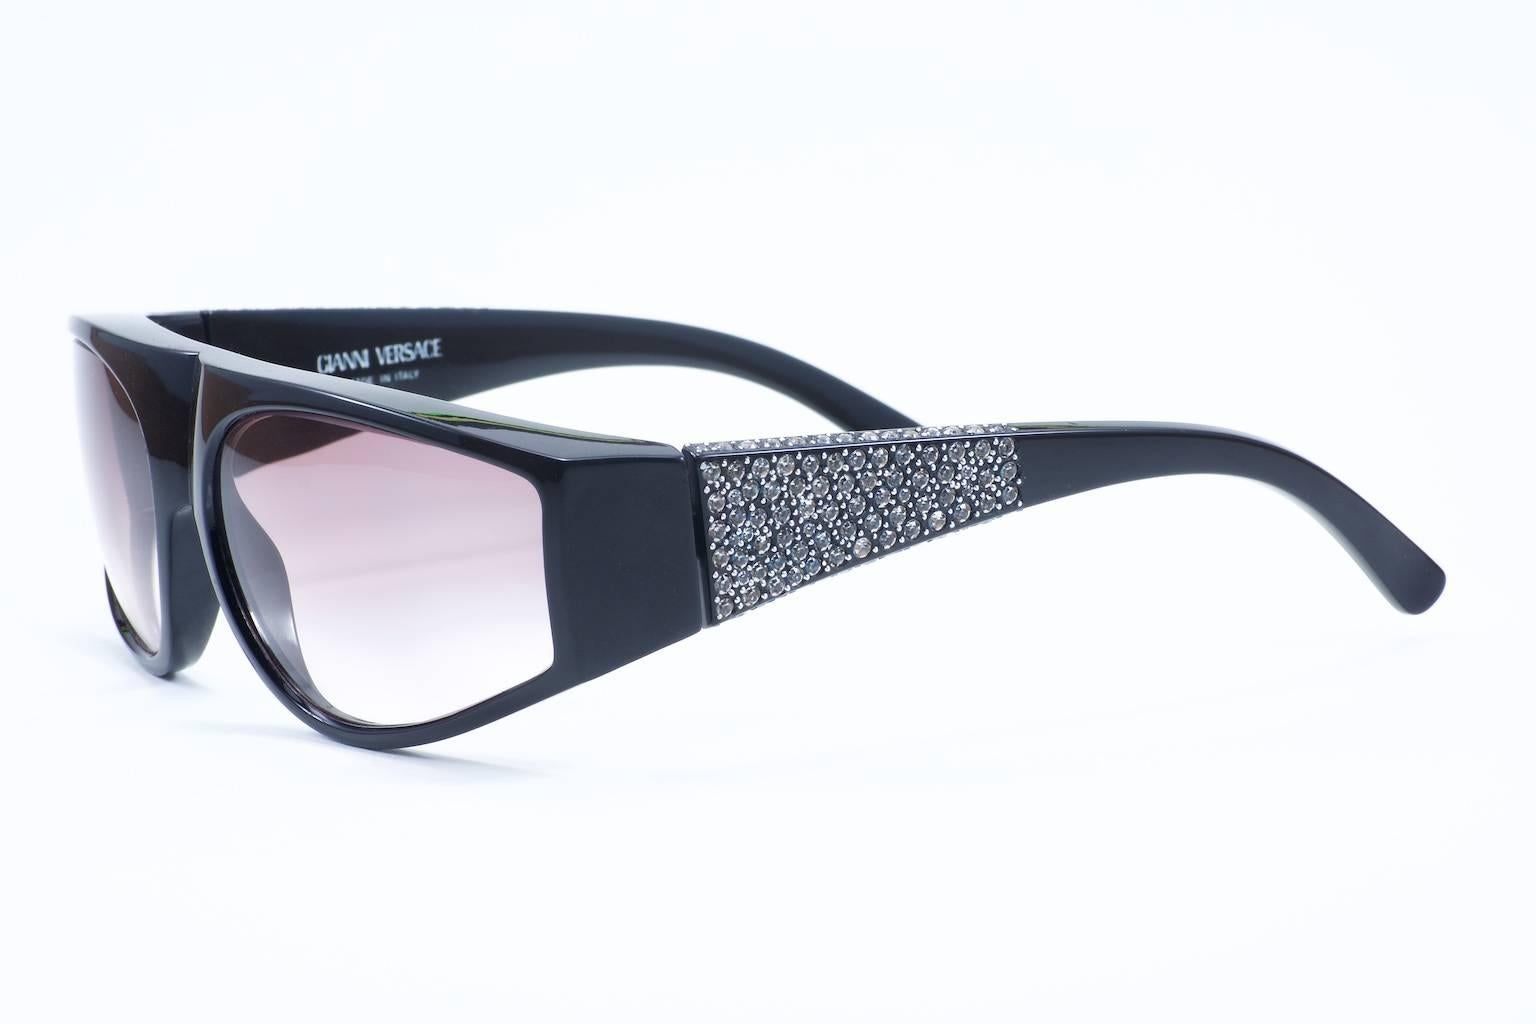 Vintage Versace Basix sunglasses c early 1990s feature a stunning array of rhinestones, not just on the side but also continuing onto the top of the ear stem, and this was the very first style in which Gianni Versace incorporated rhinestones into